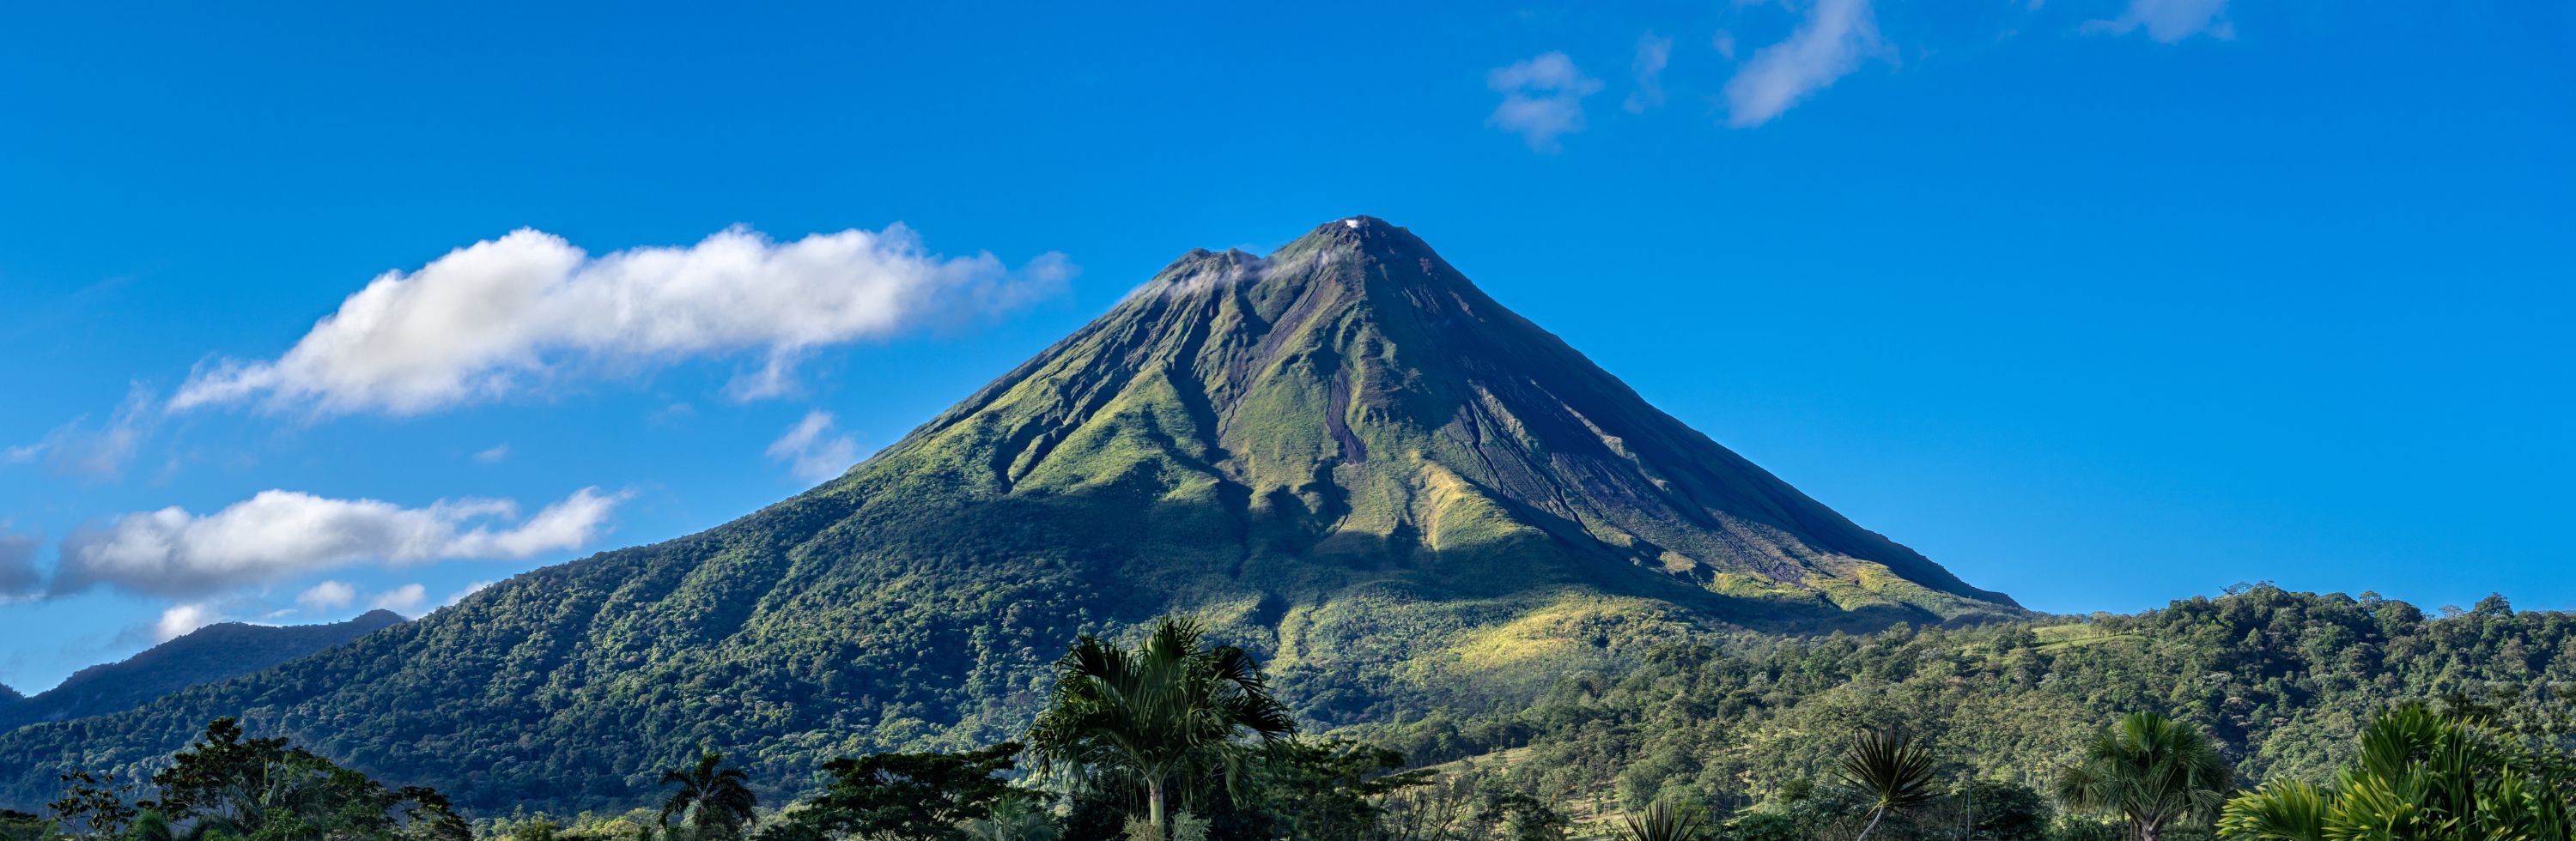 BGYB Destination : Suggested Itinerary for Costa Rica